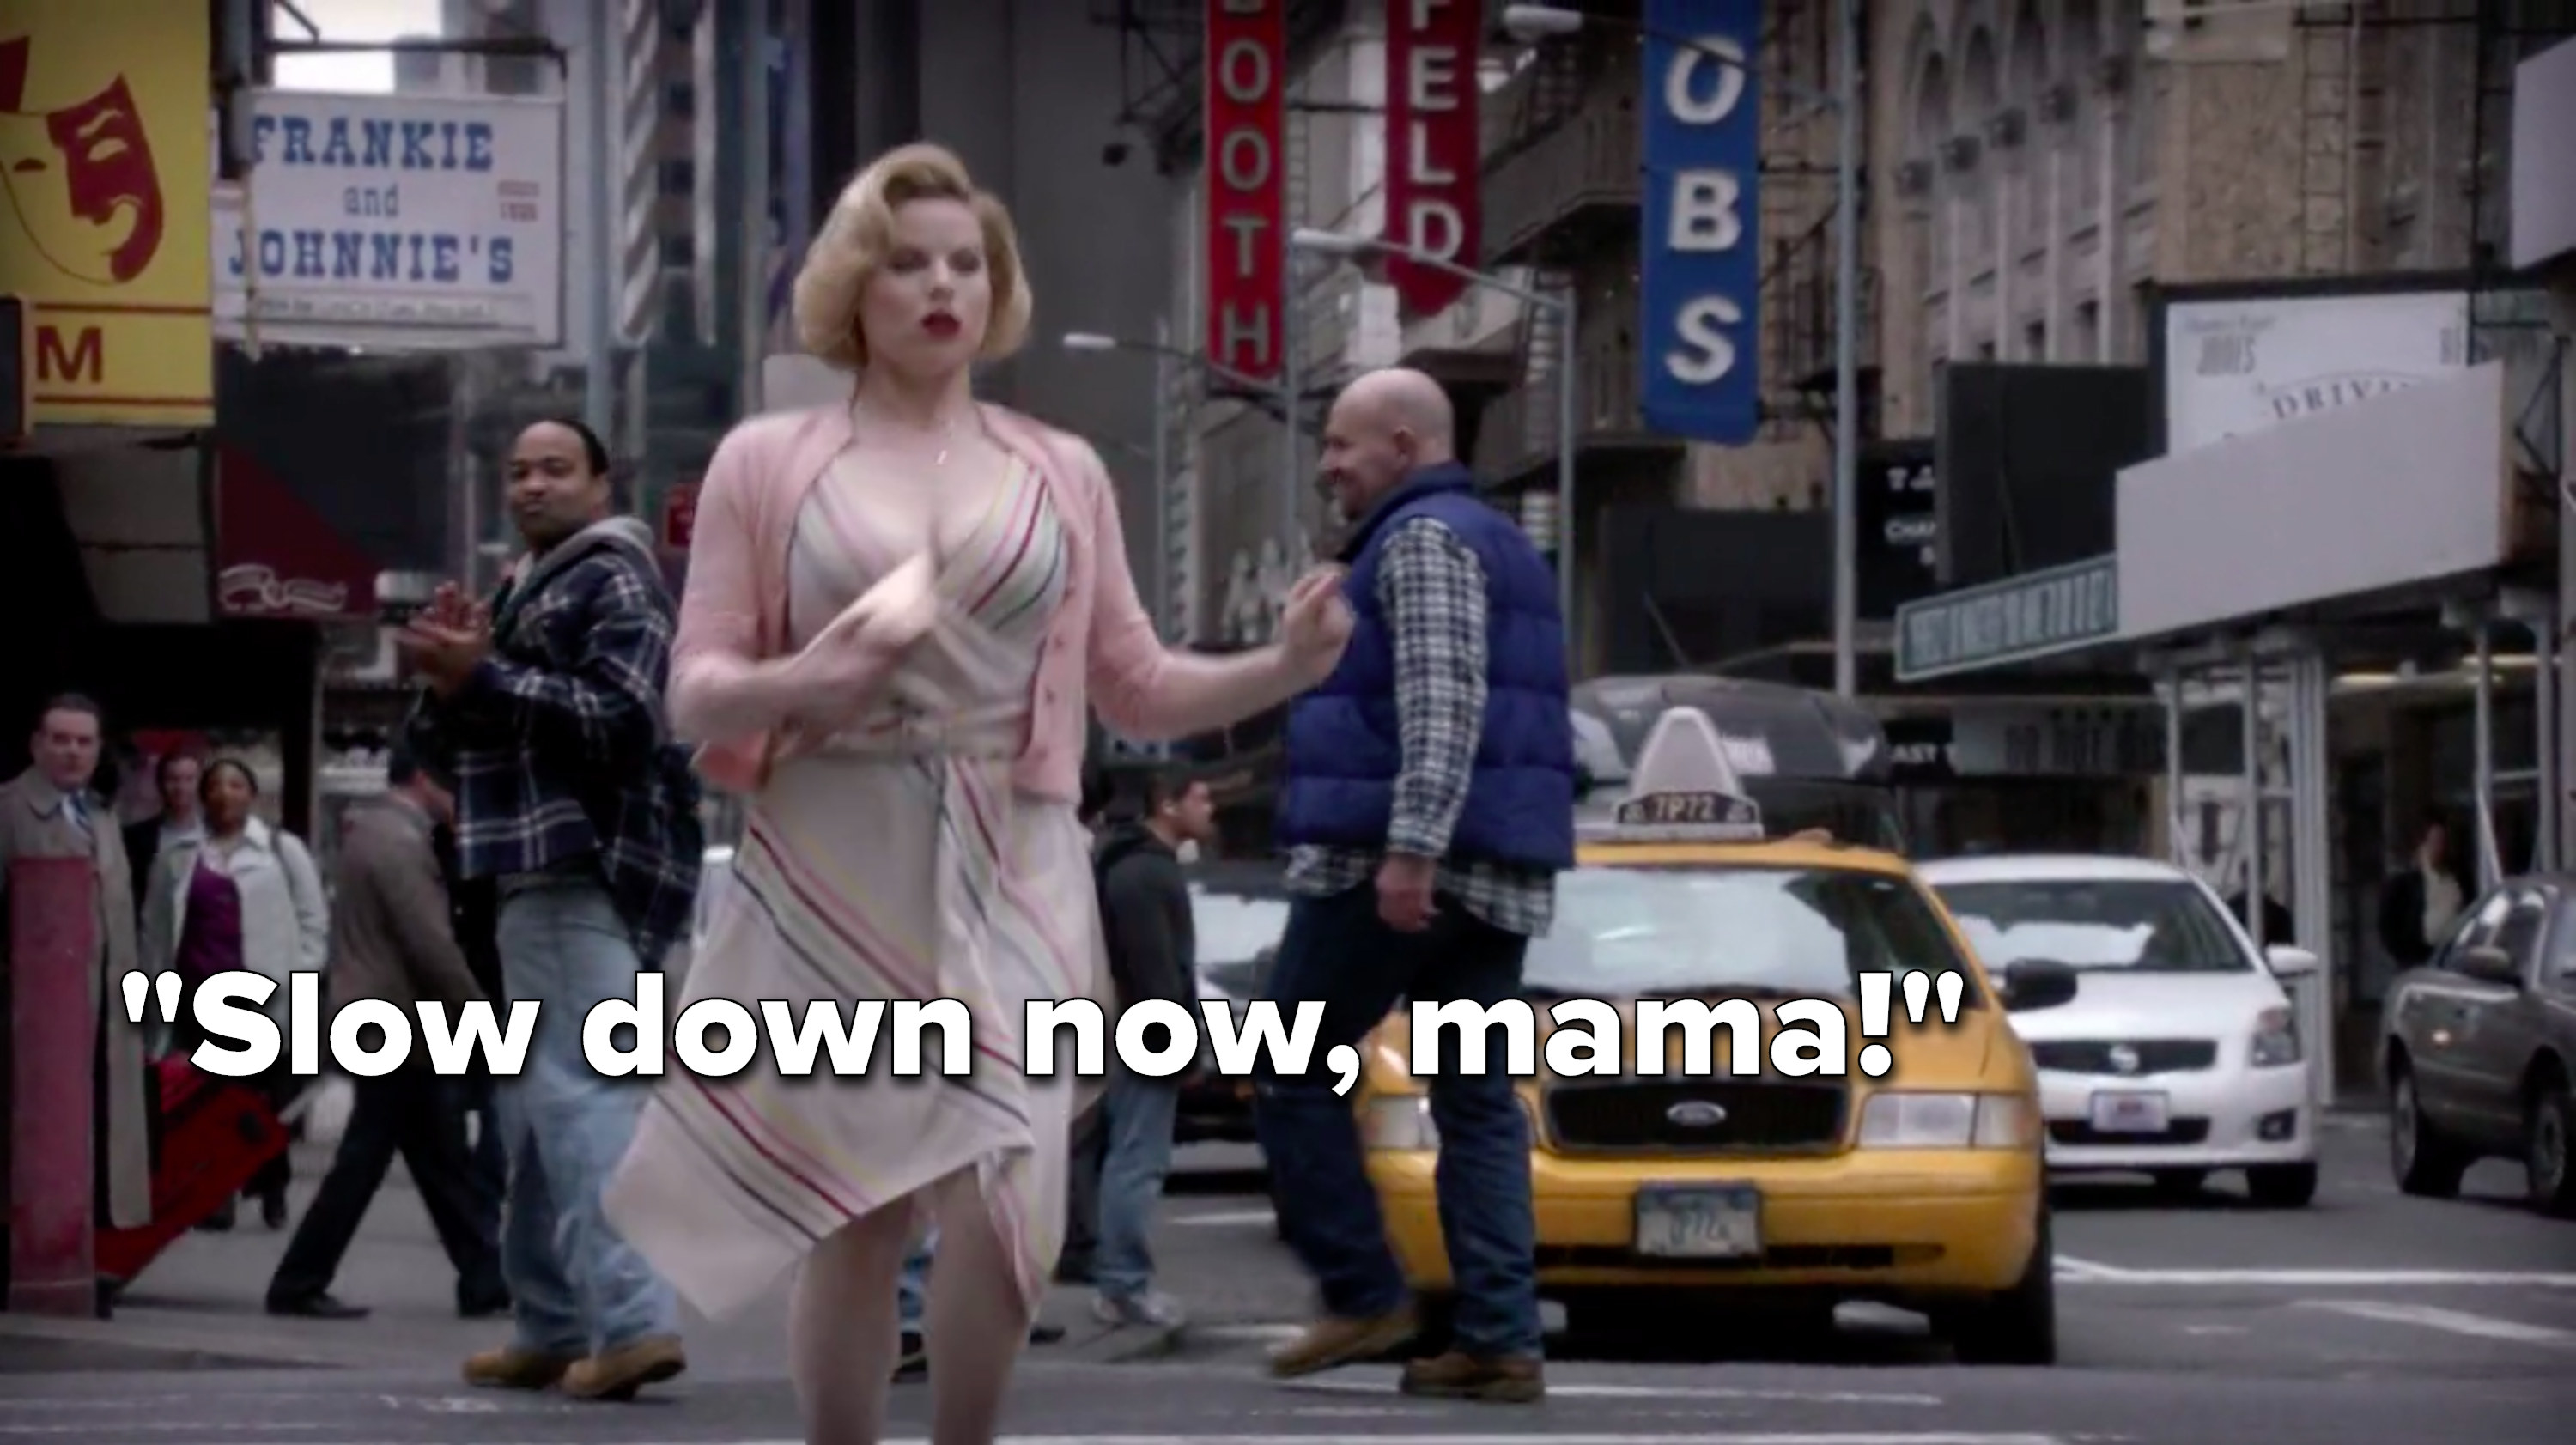 Ivy is running to her audition, dressed as Marilyn Monroe, and a man catcalls her and says, &quot;Slow down now, mama&quot;